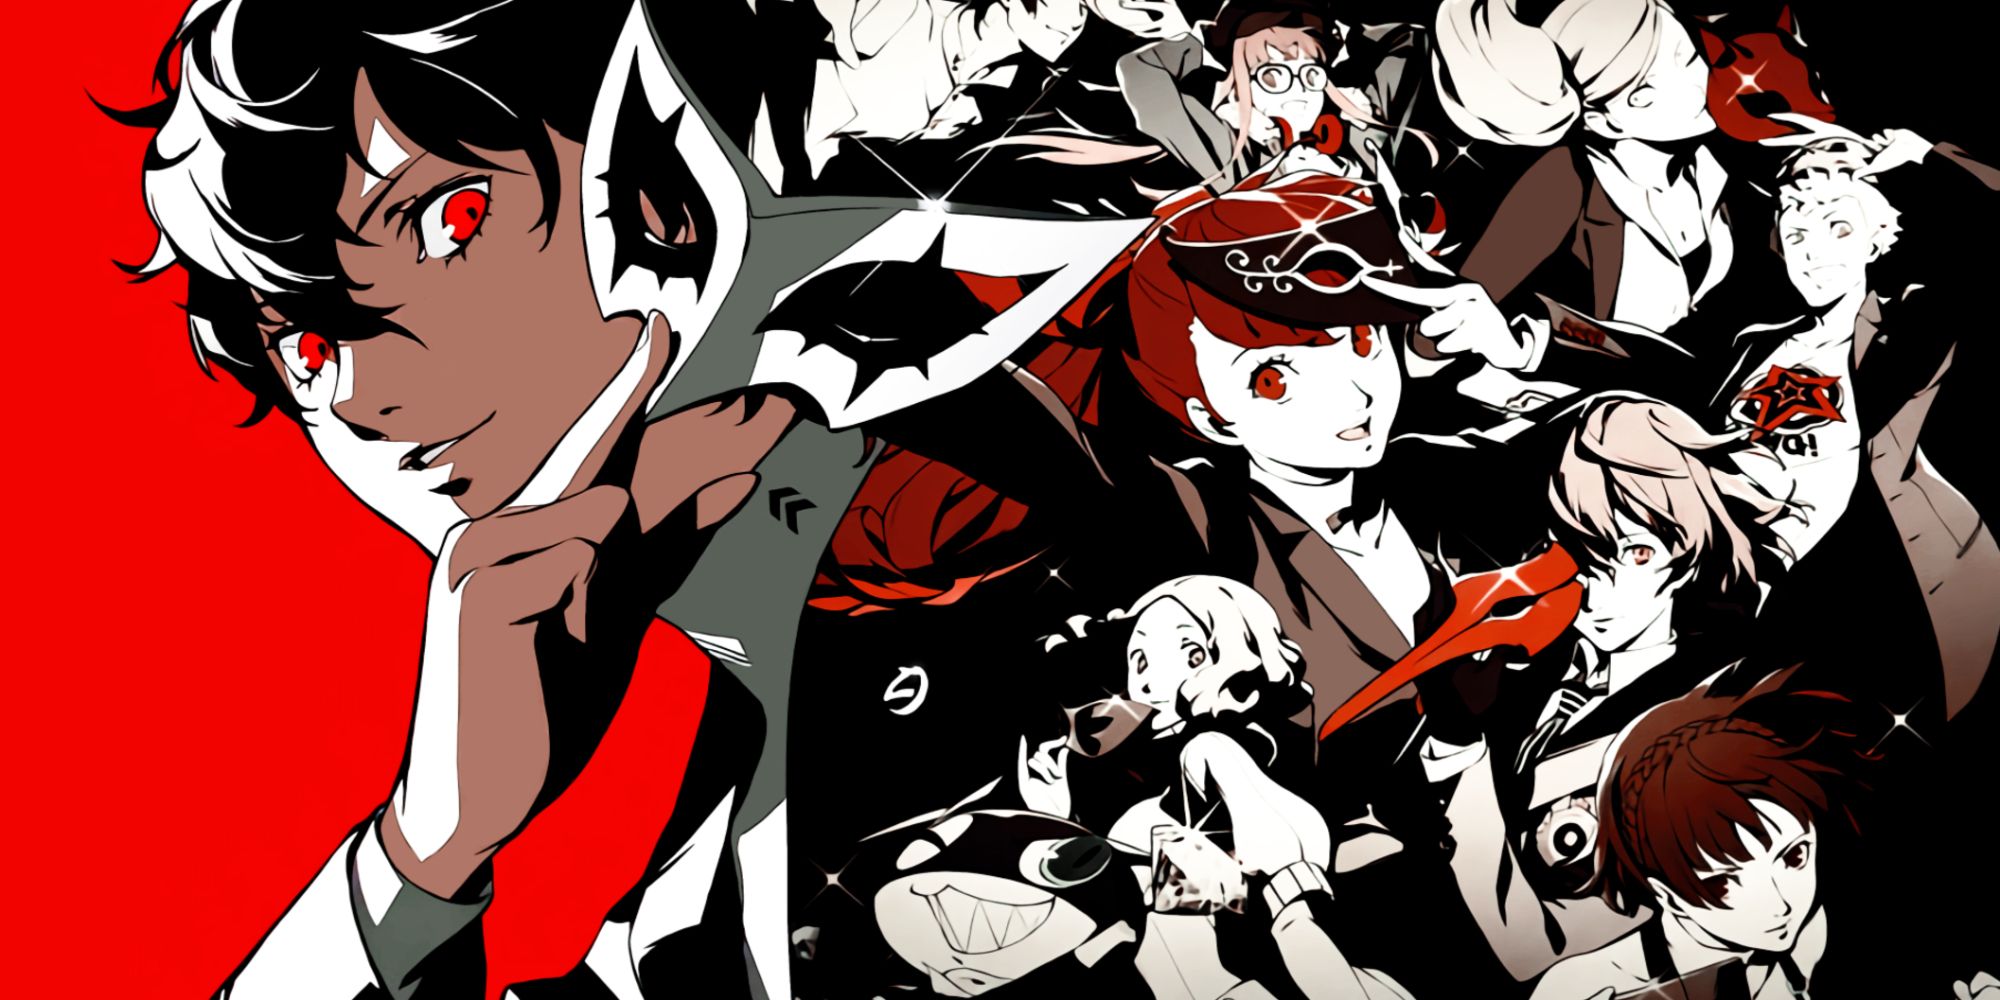 Persona 5 characters all together in a collage